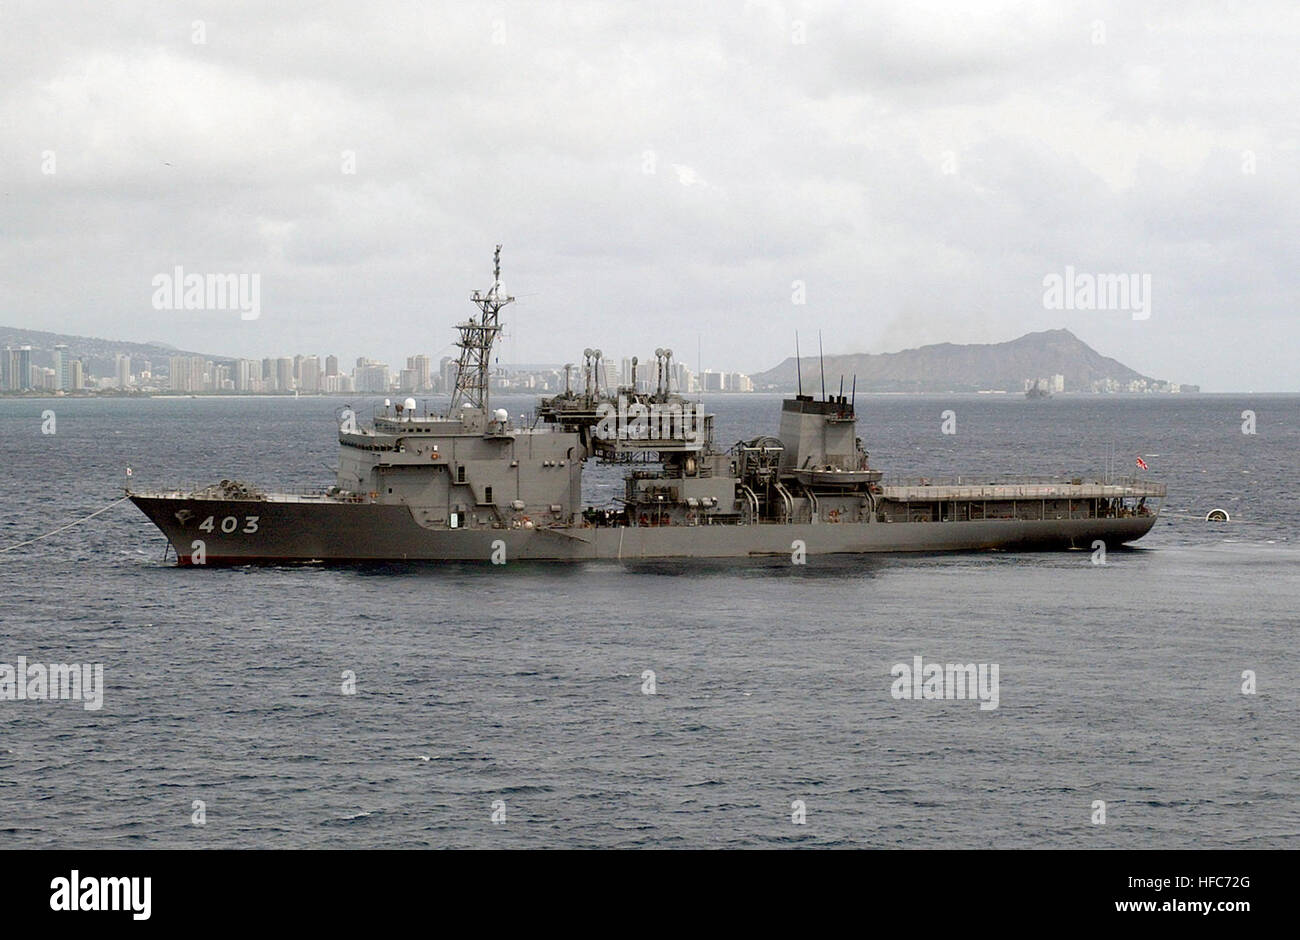 A port side view of the Japanese Maritime Self Defense Force CHIYODA CLASS: SUBMARINE DEPTO AND RESCUE SHIP, CHIHAYA (AS 403) moored about 1 mile south of Honolulu International Airport's Reef Runway, during recovery operations for the Japanese fishing vessel Ehime Maru. JS Chiyaha (AS-403) at Honolulu, -8 Nov. 2001 a Stock Photo